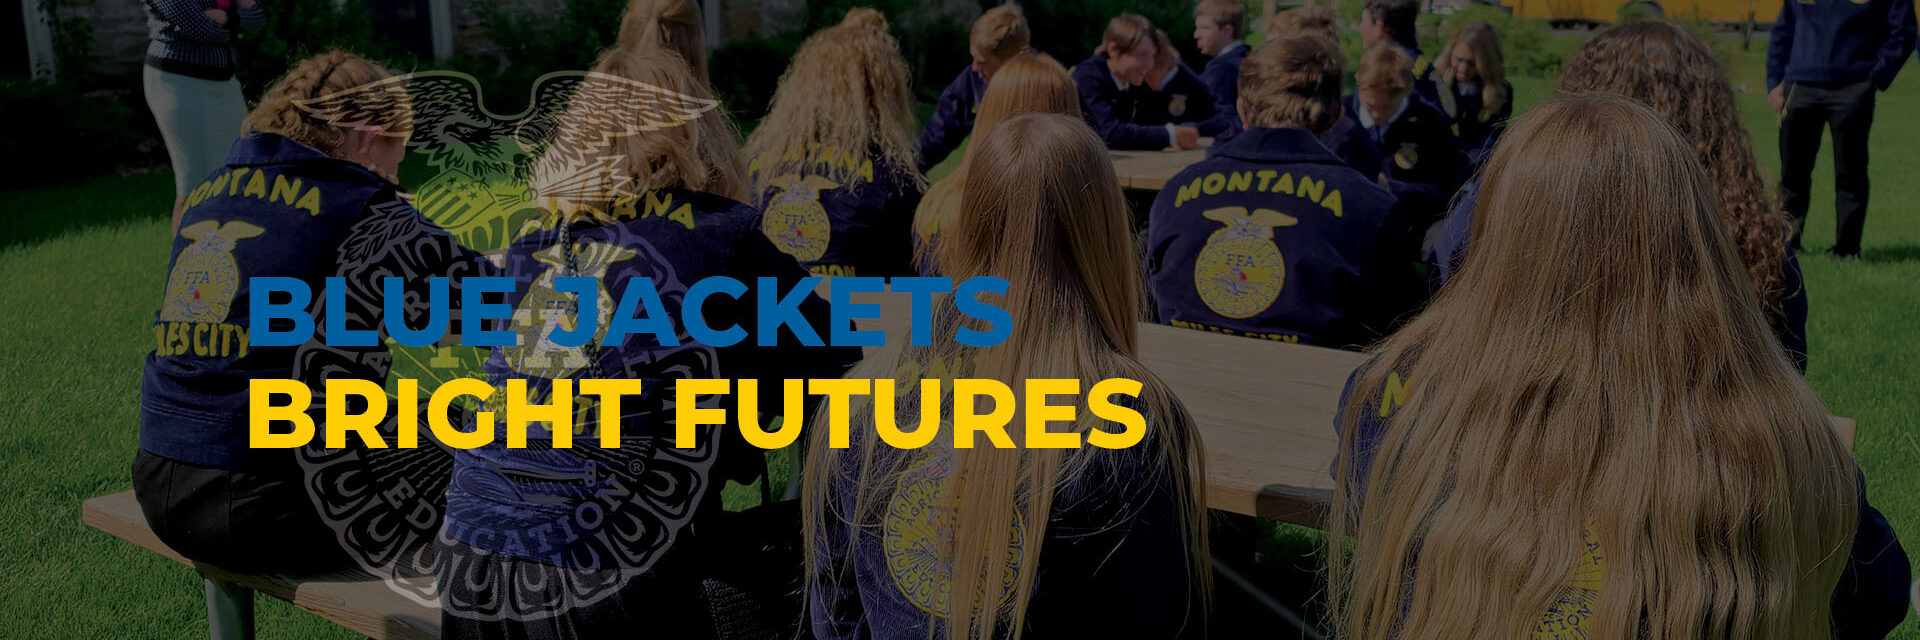 Montana FFA Blue Jackets Bright Futures Home Page Banner